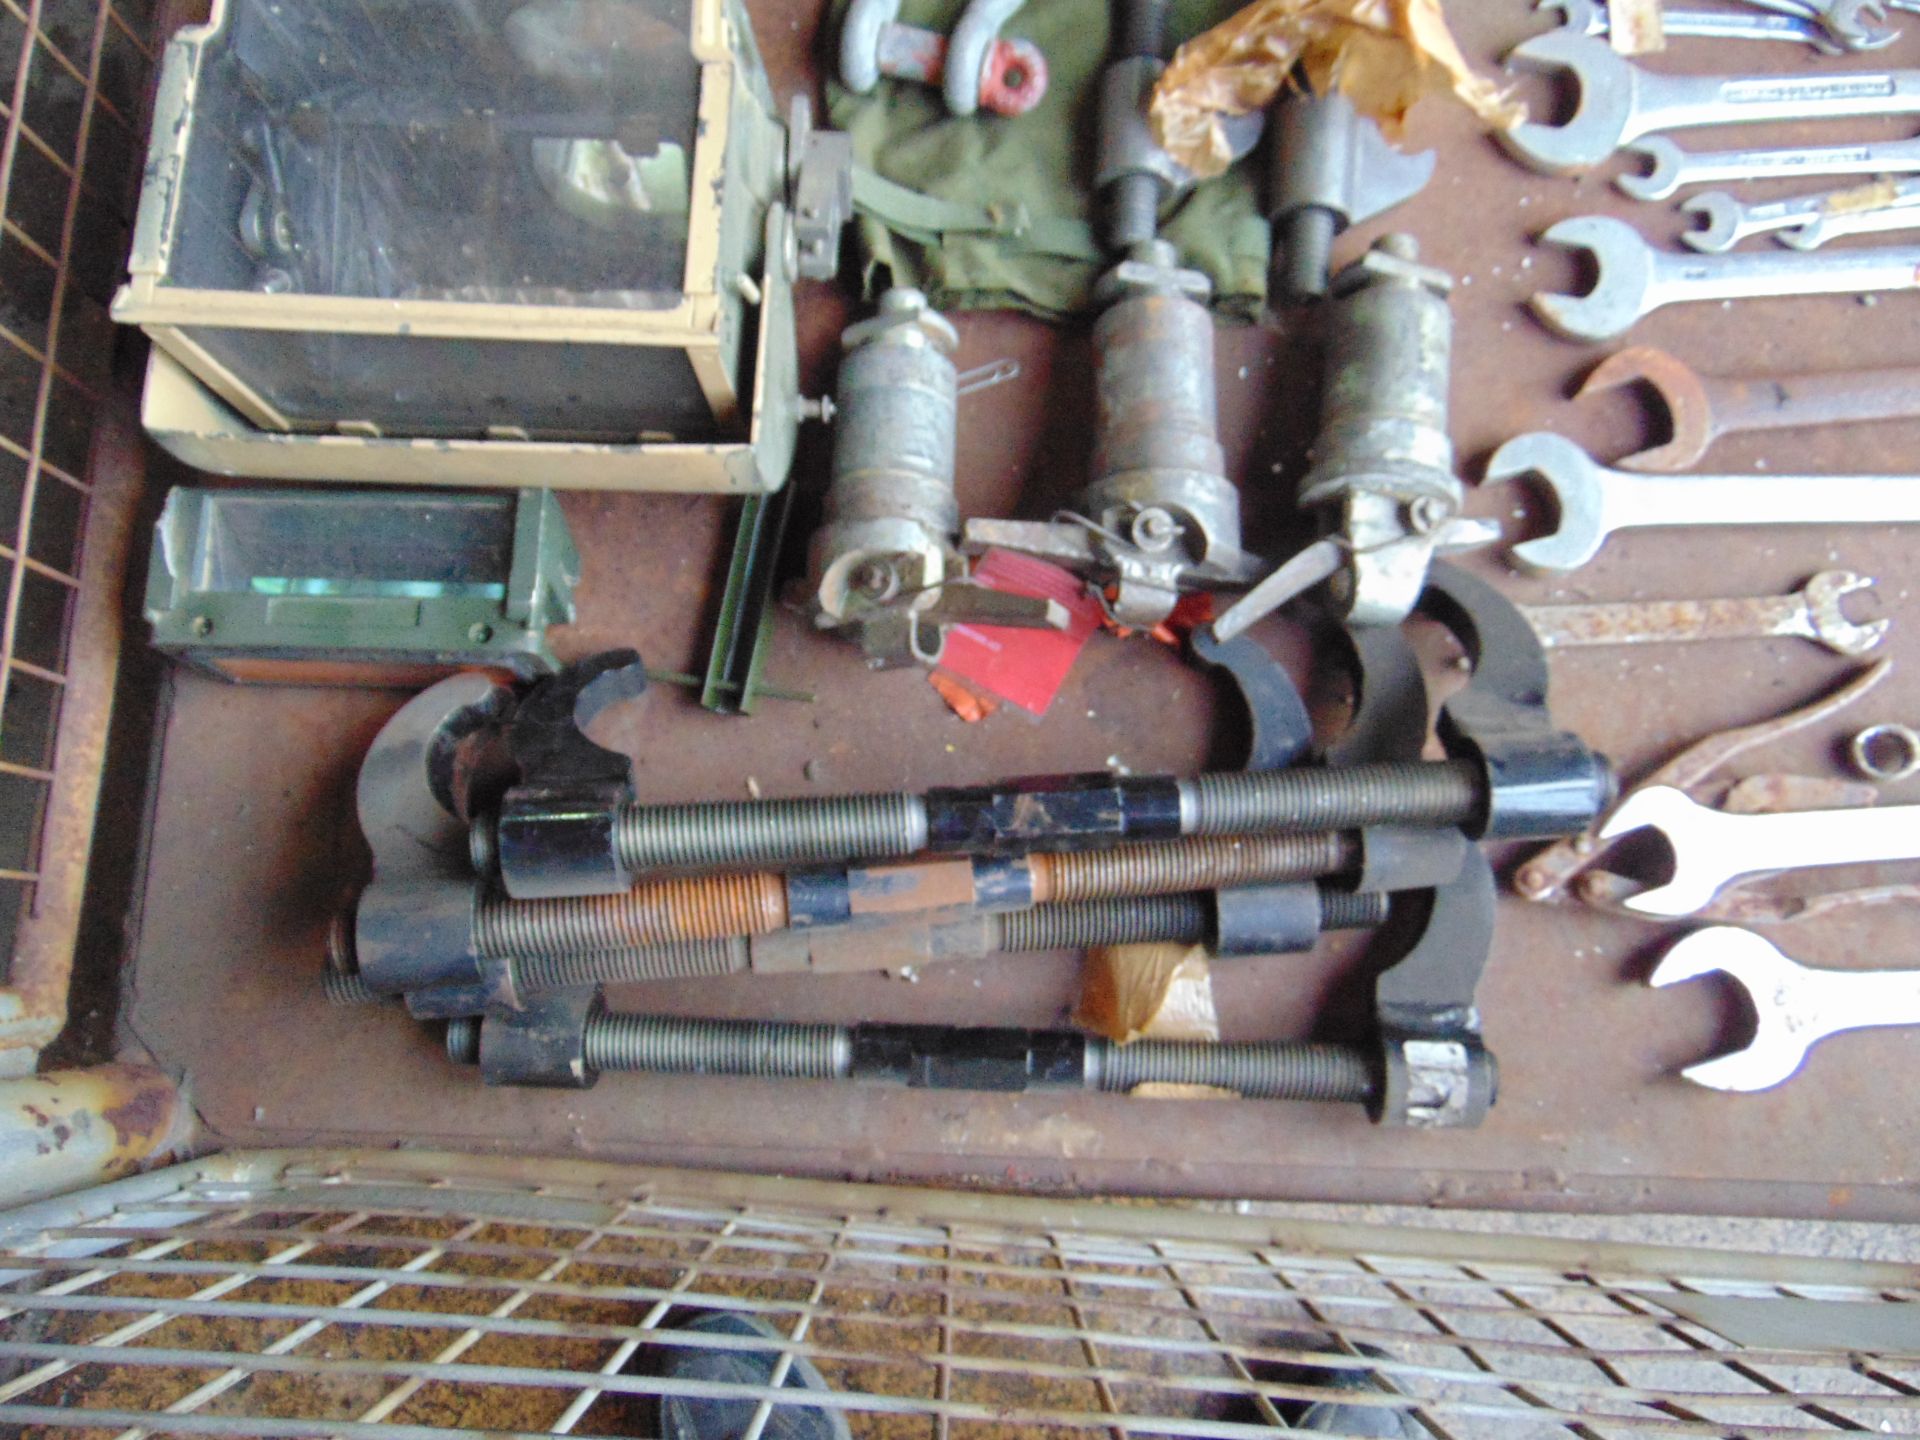 Track Clamps Periscope, Tools, Recovery Pins etc - Image 4 of 8